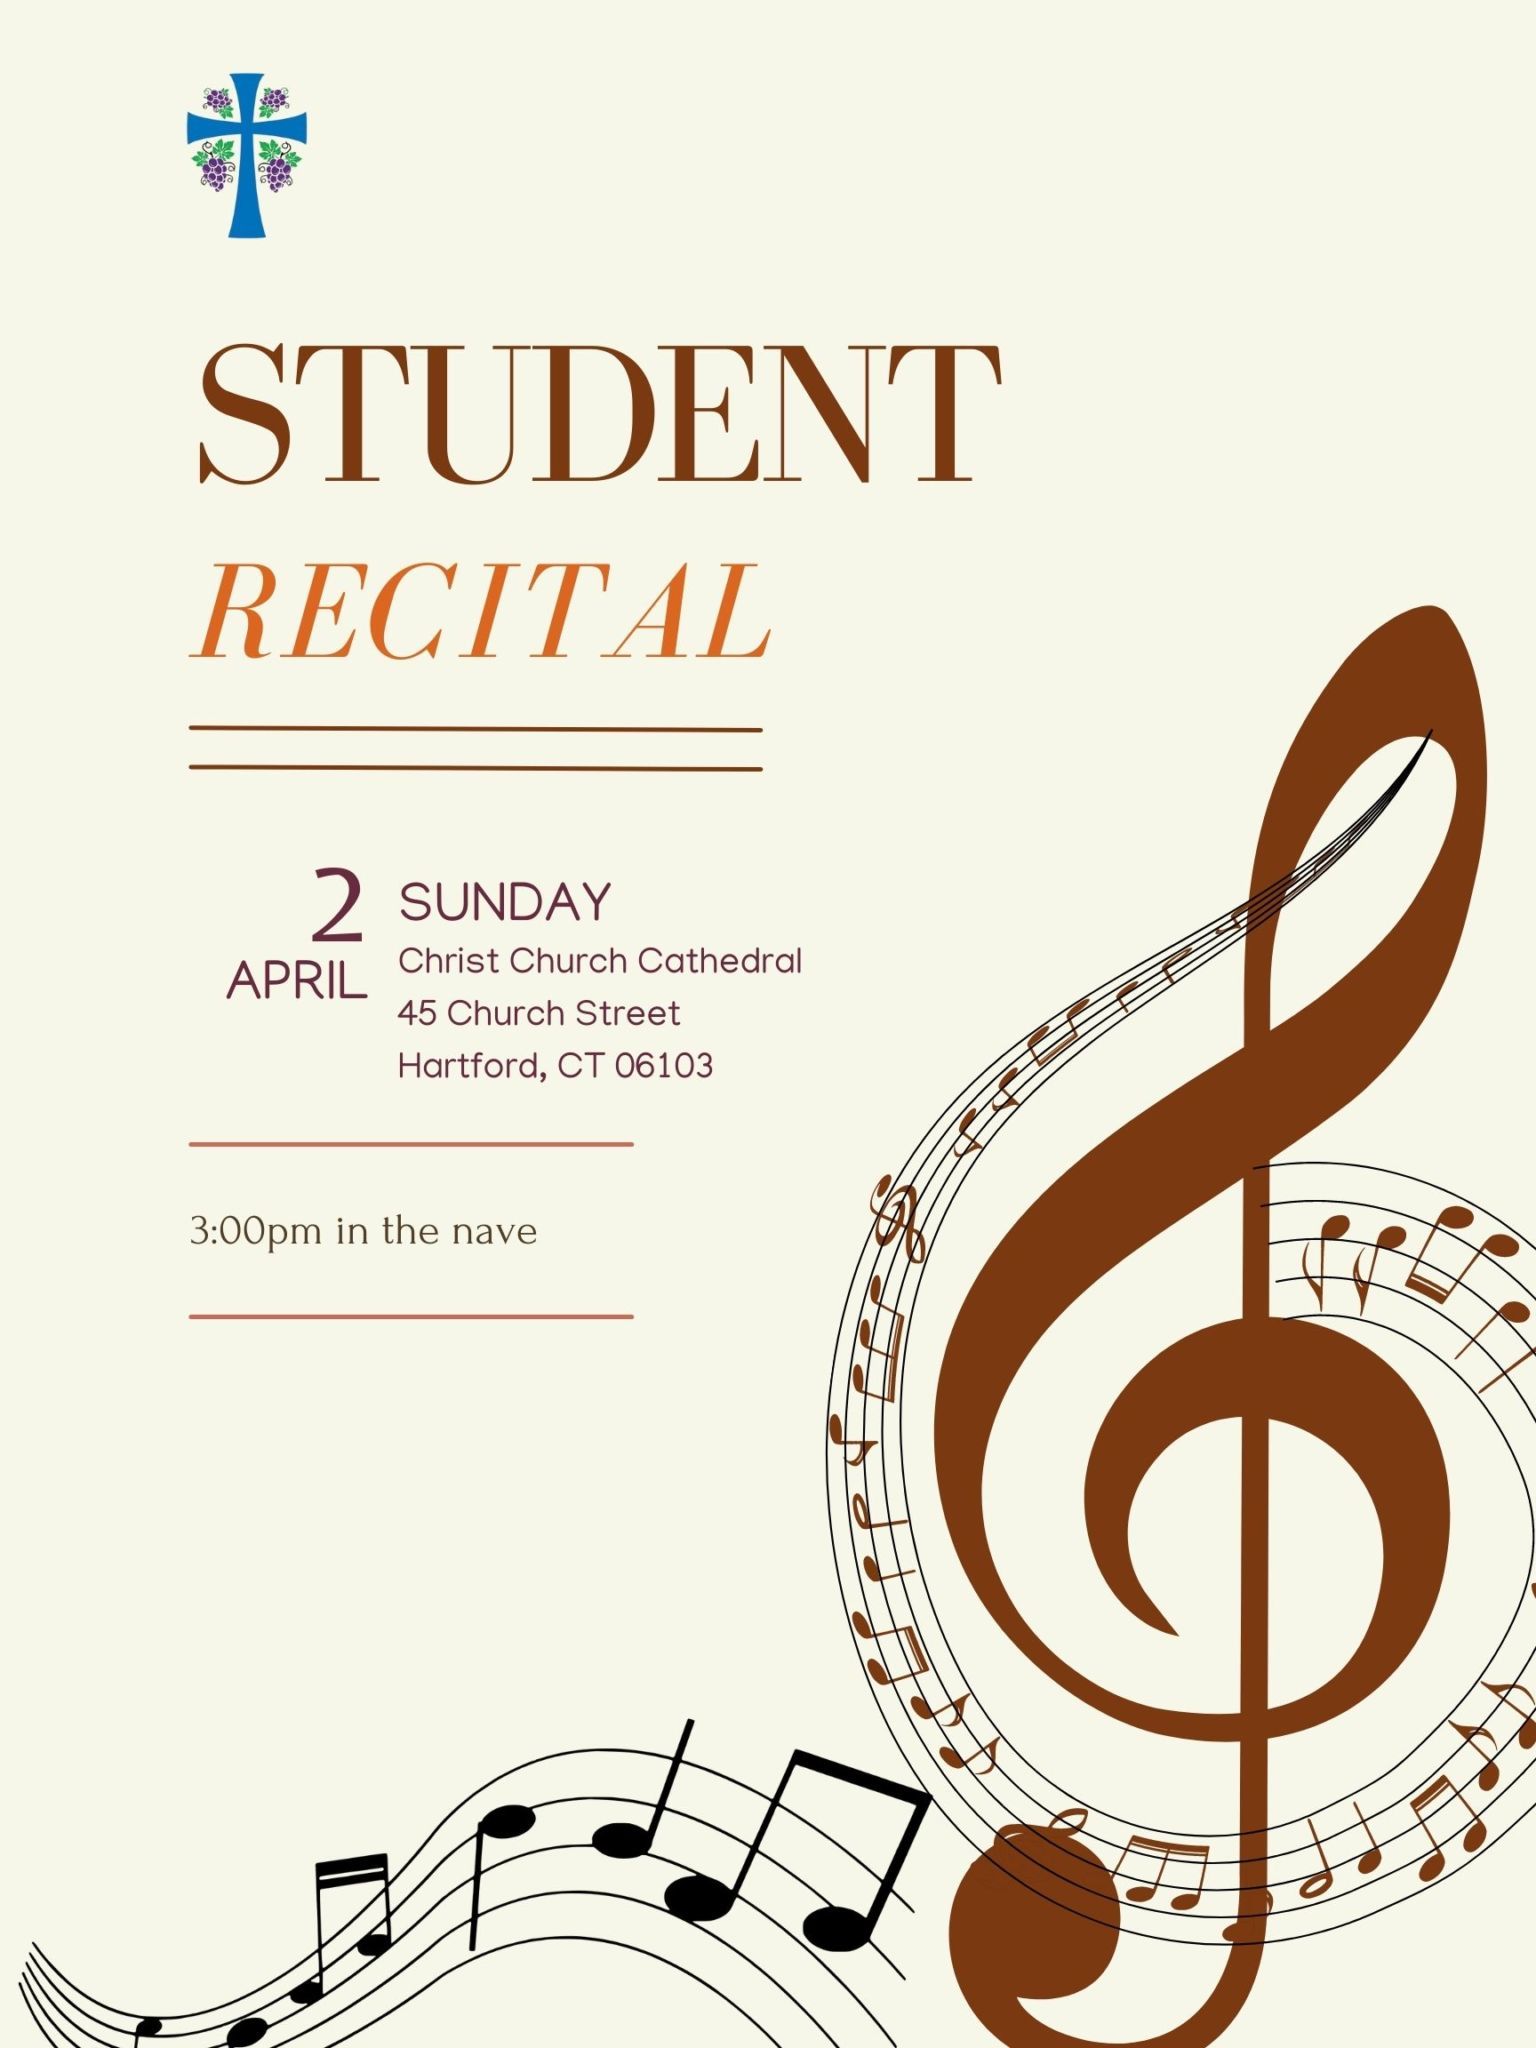 Student Recital at Christ Church Cathedral